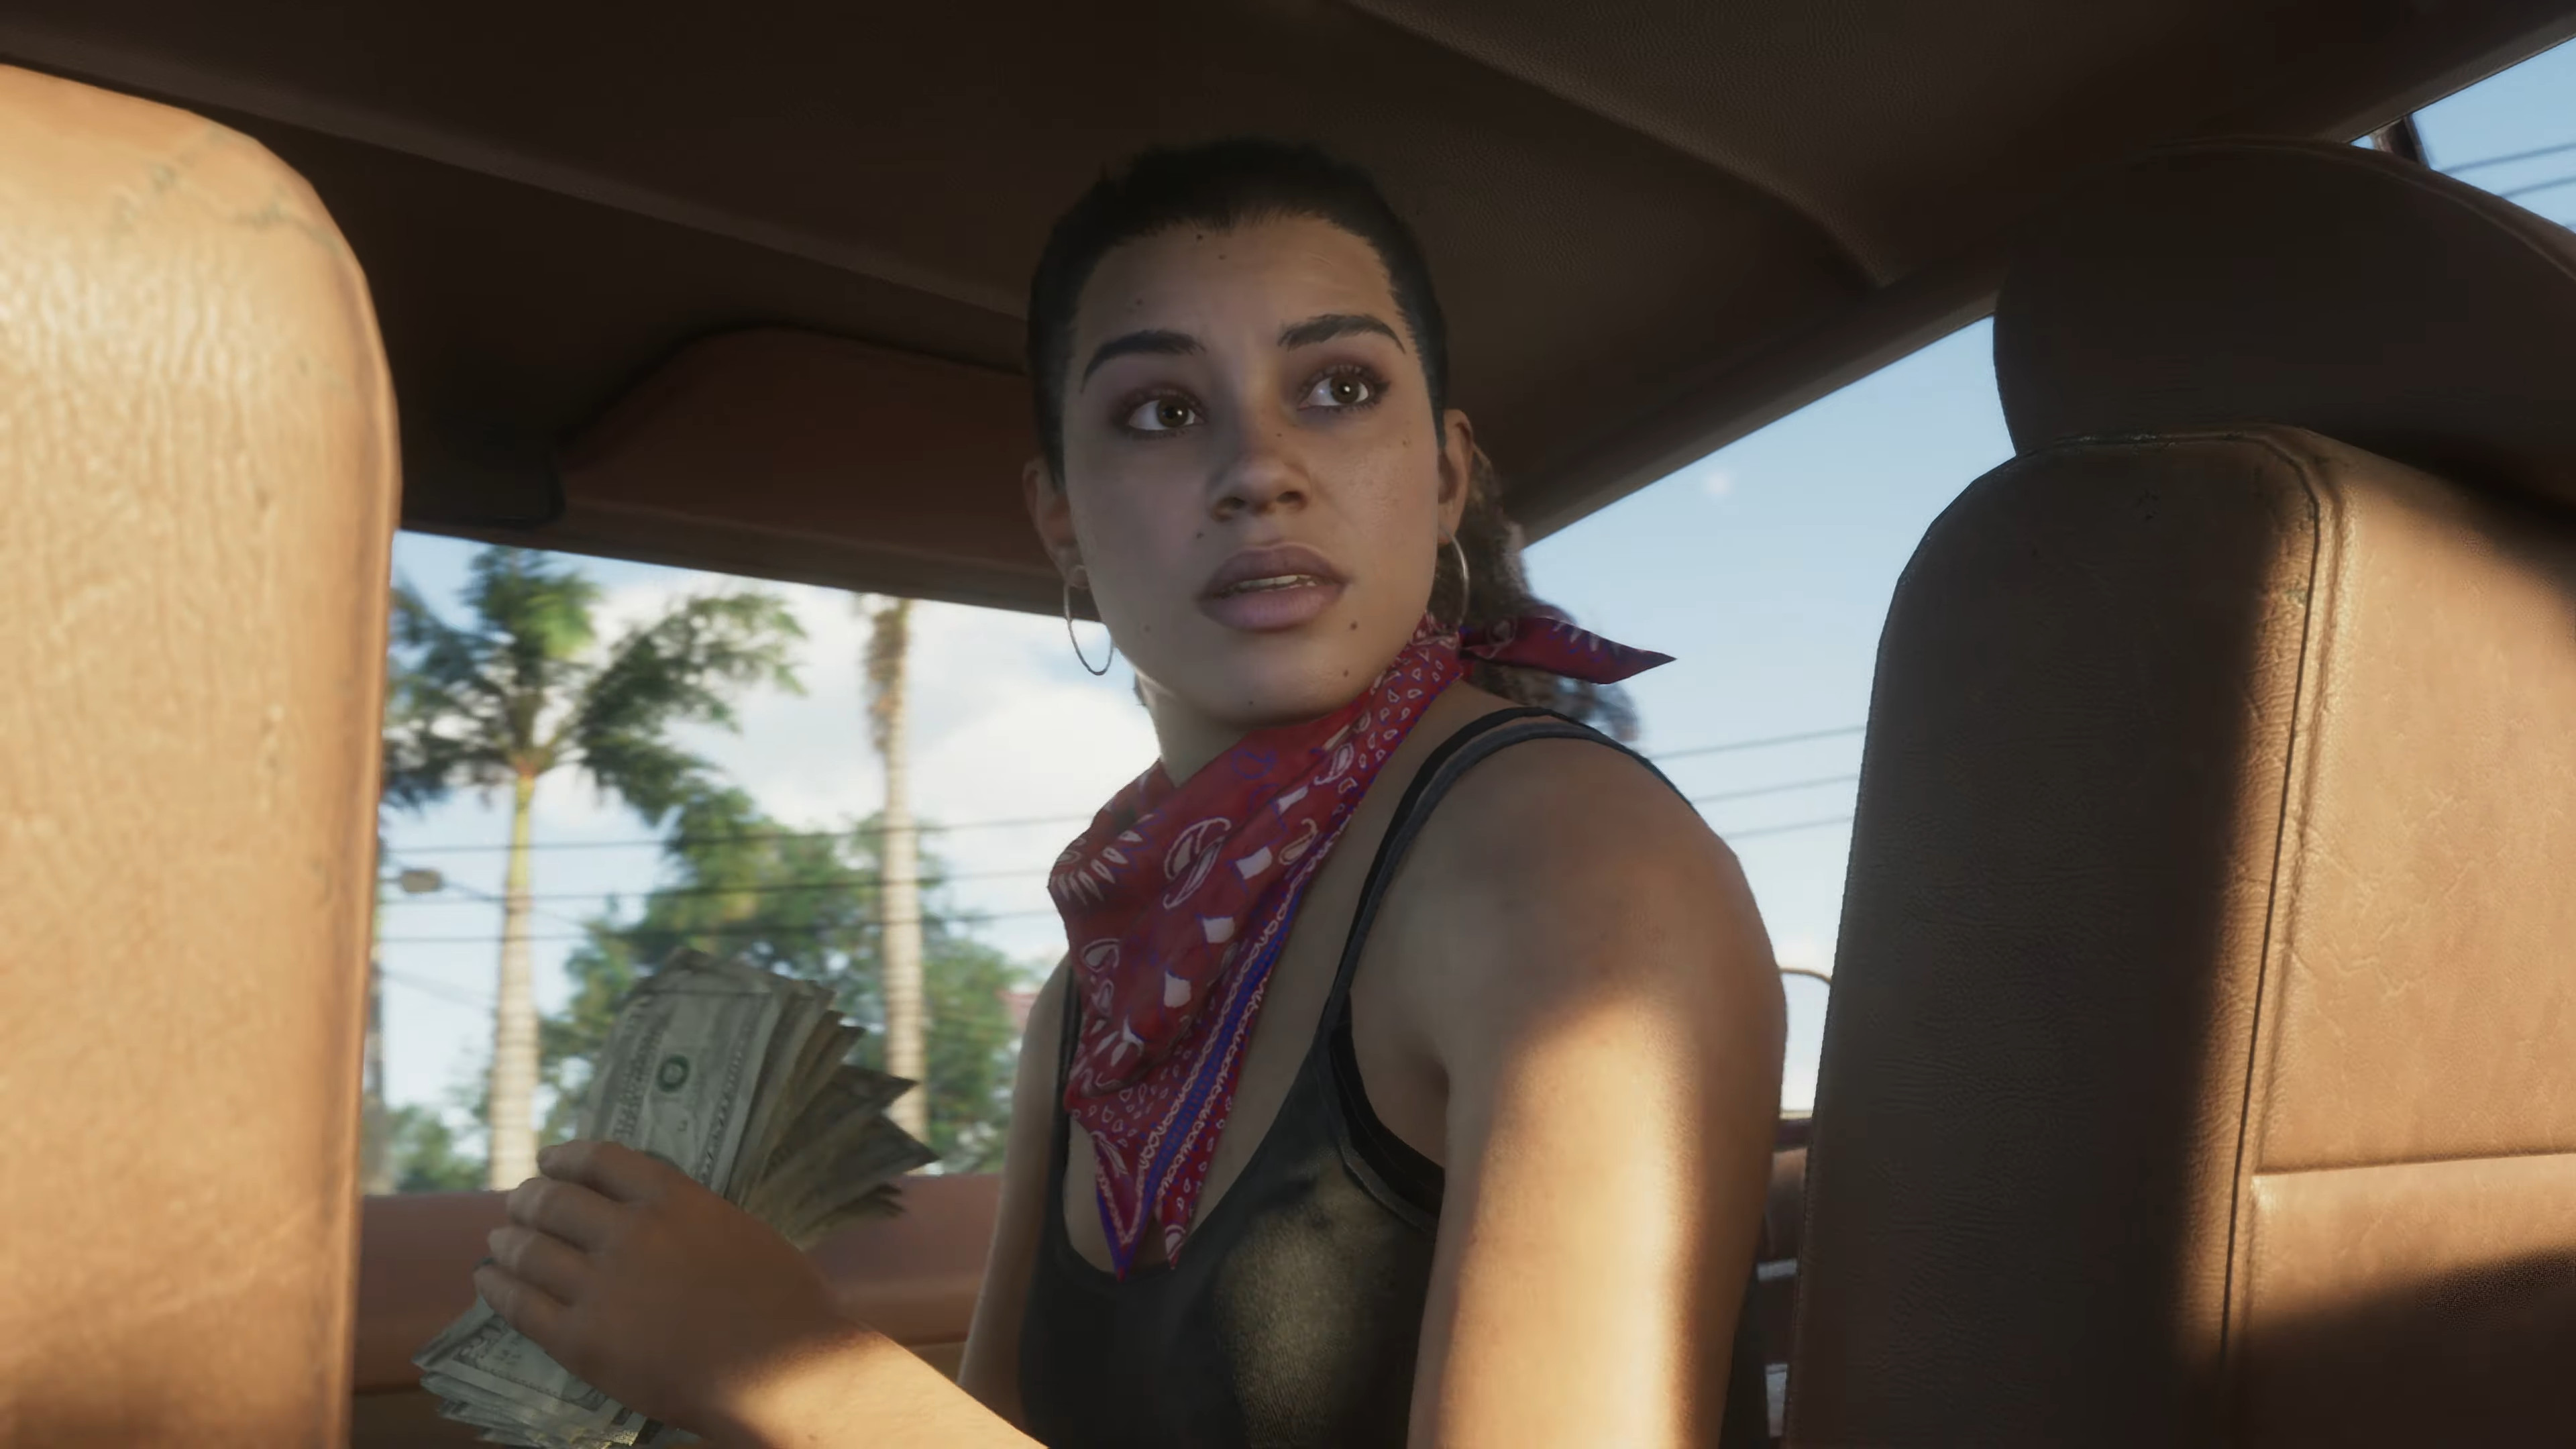 GTA 6' trailer early drop: A timeline of the chaos - Tech